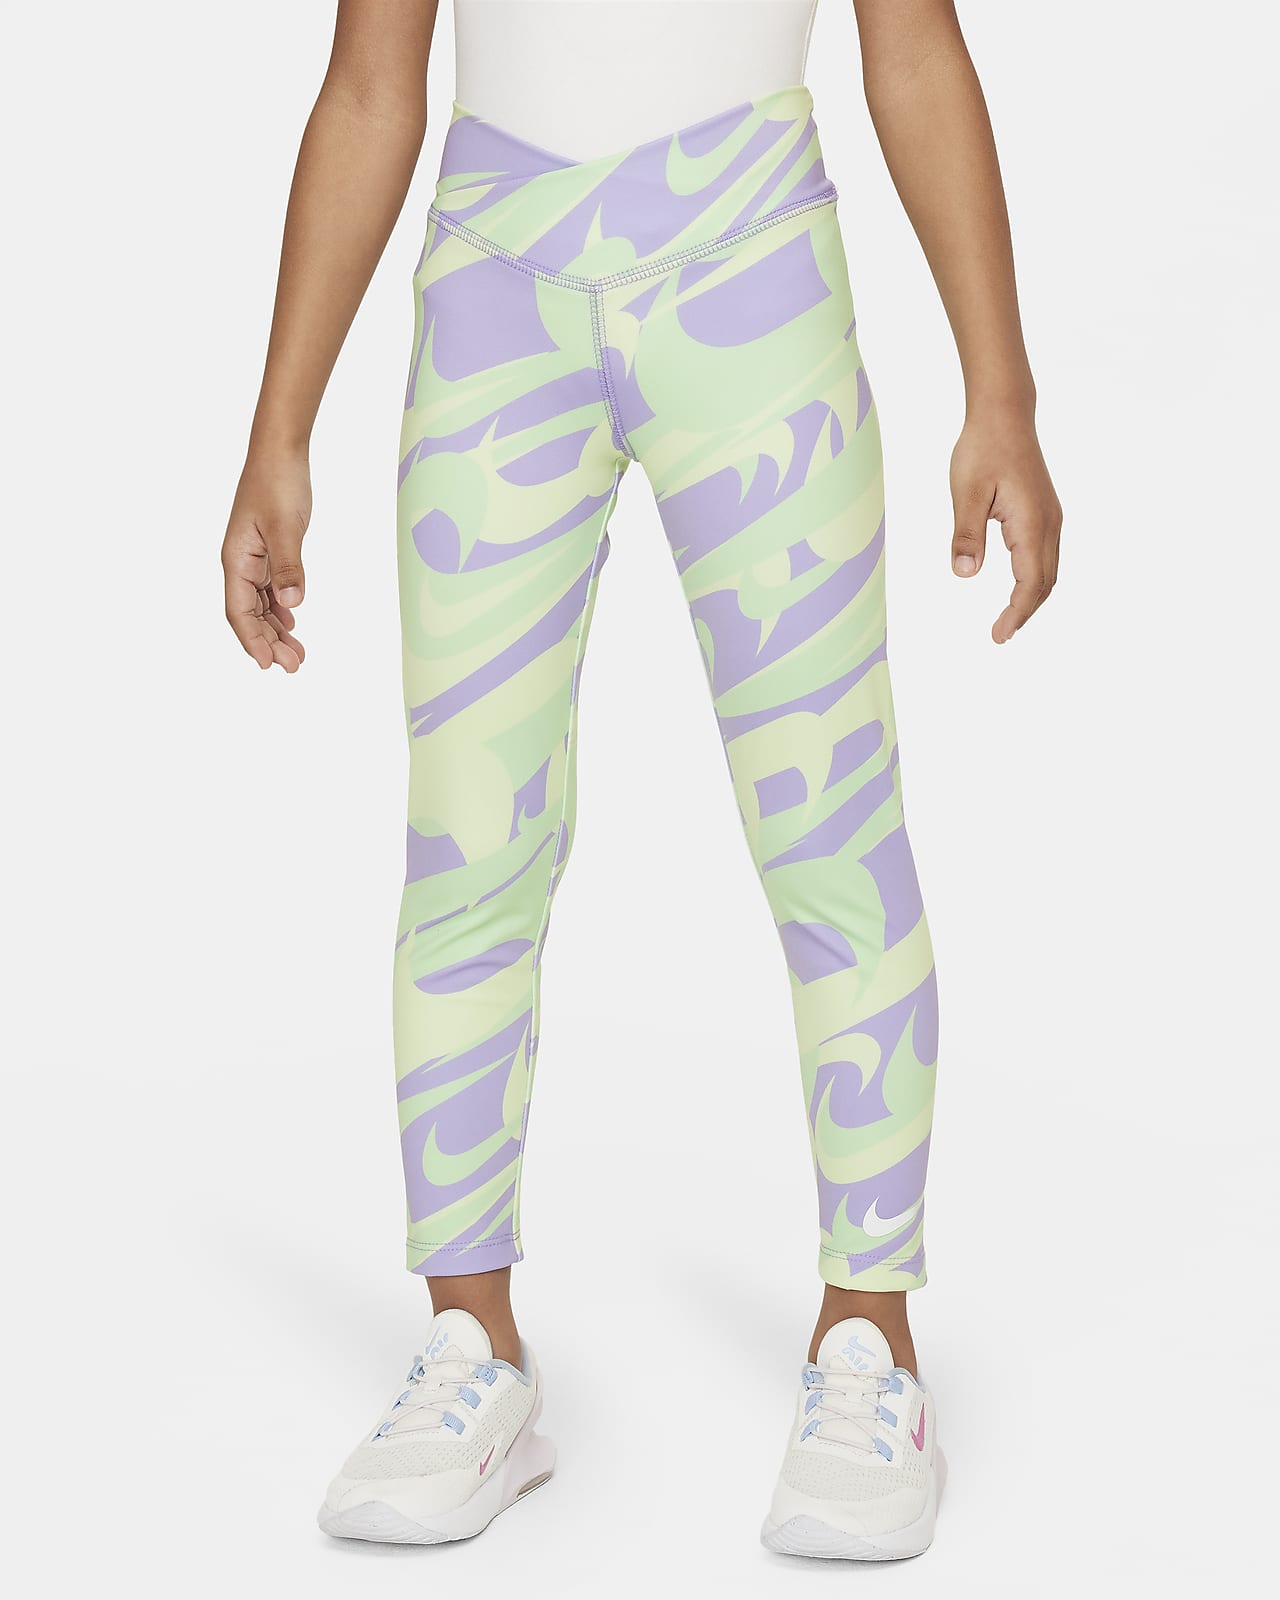 Nike Dri-FIT Prep in Your Step Younger Kids' Leggings